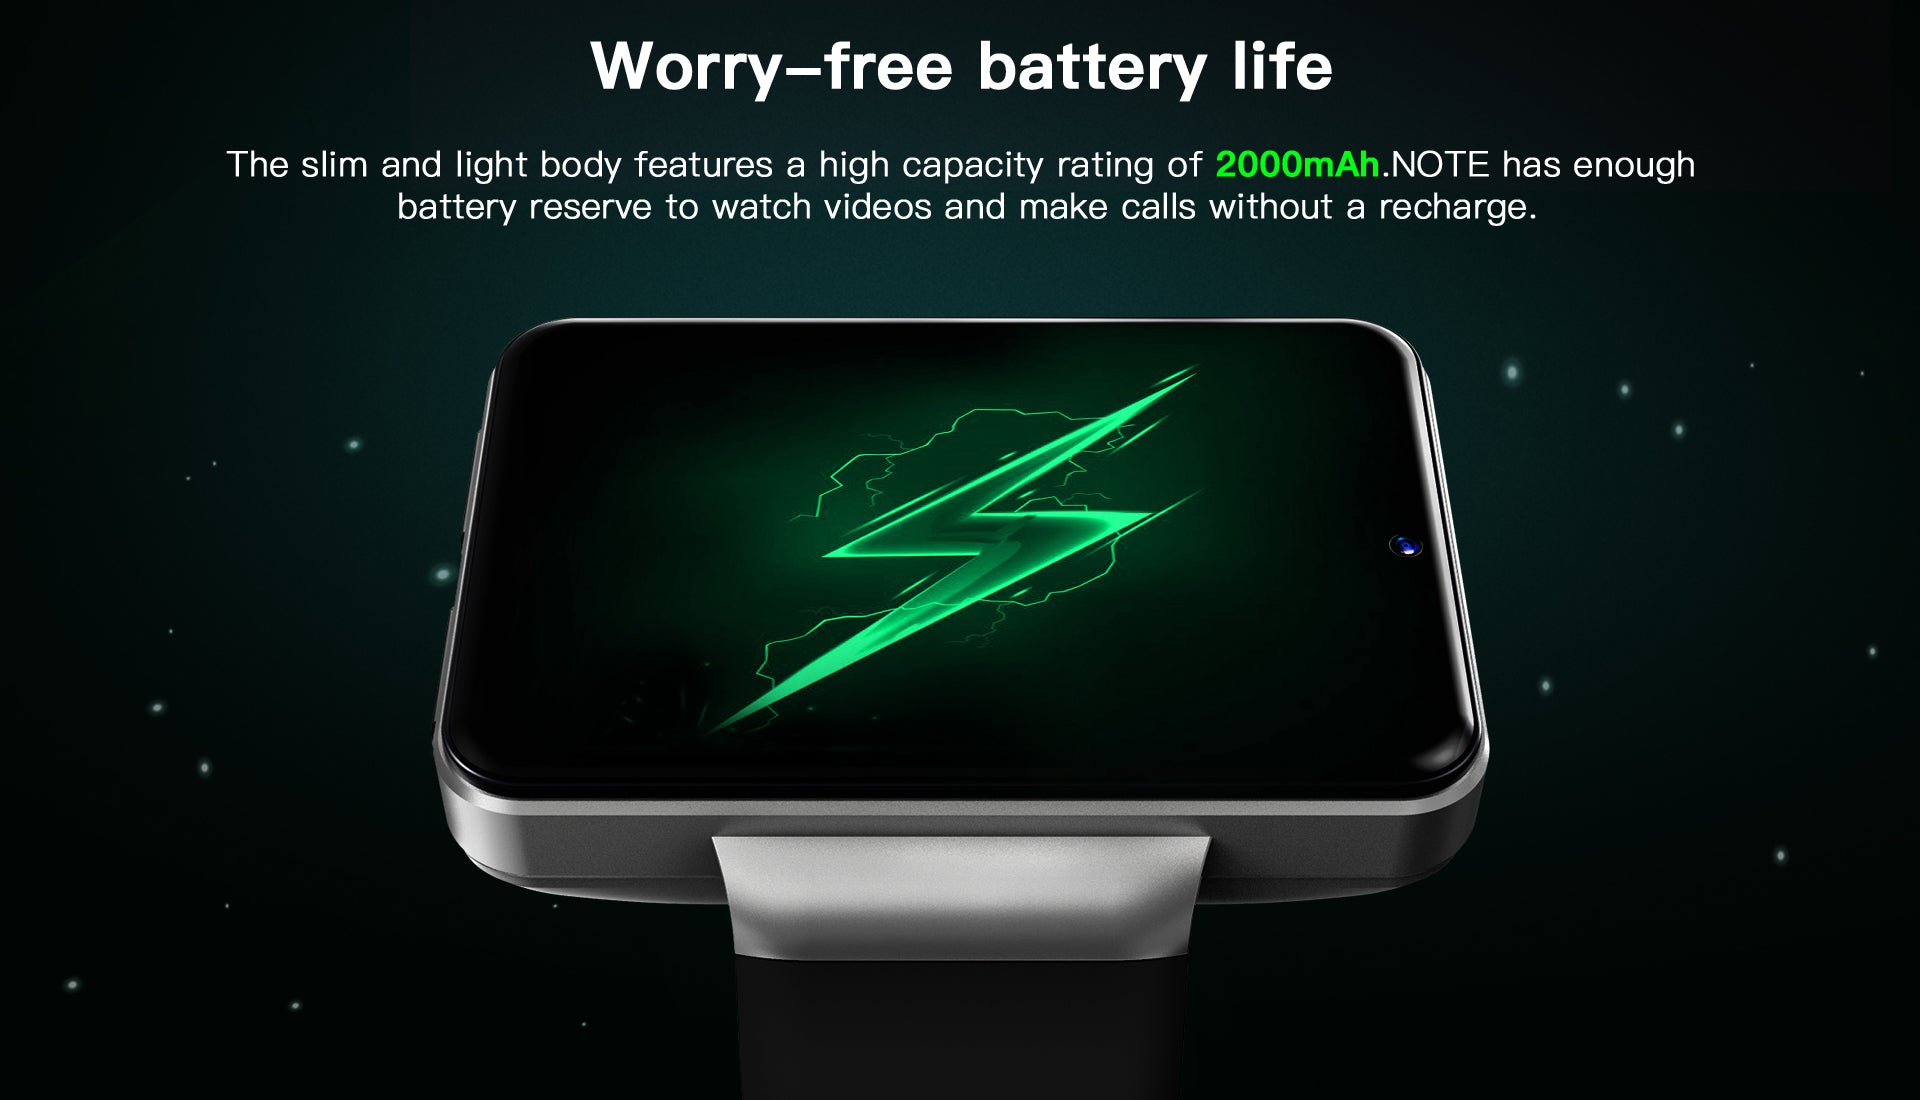 KOSPET NOTE Smartwatch with 2000mAh Big Battery